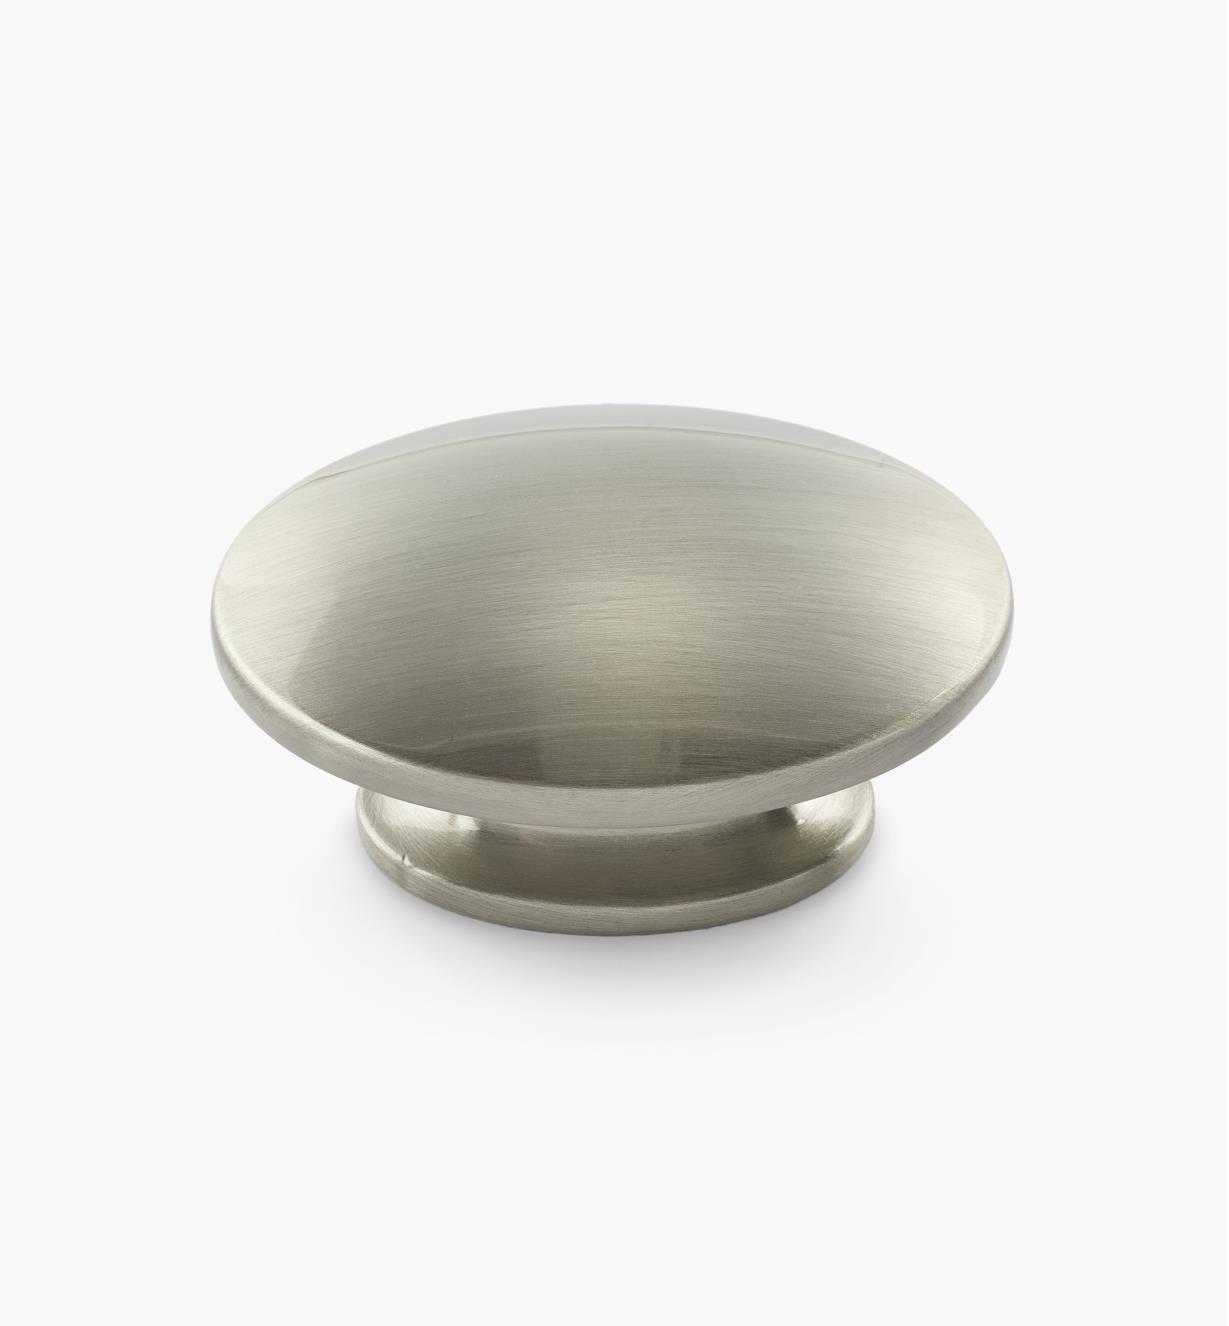 02A4412 - Dome-Faced Small Satin Nickel Oval Knob